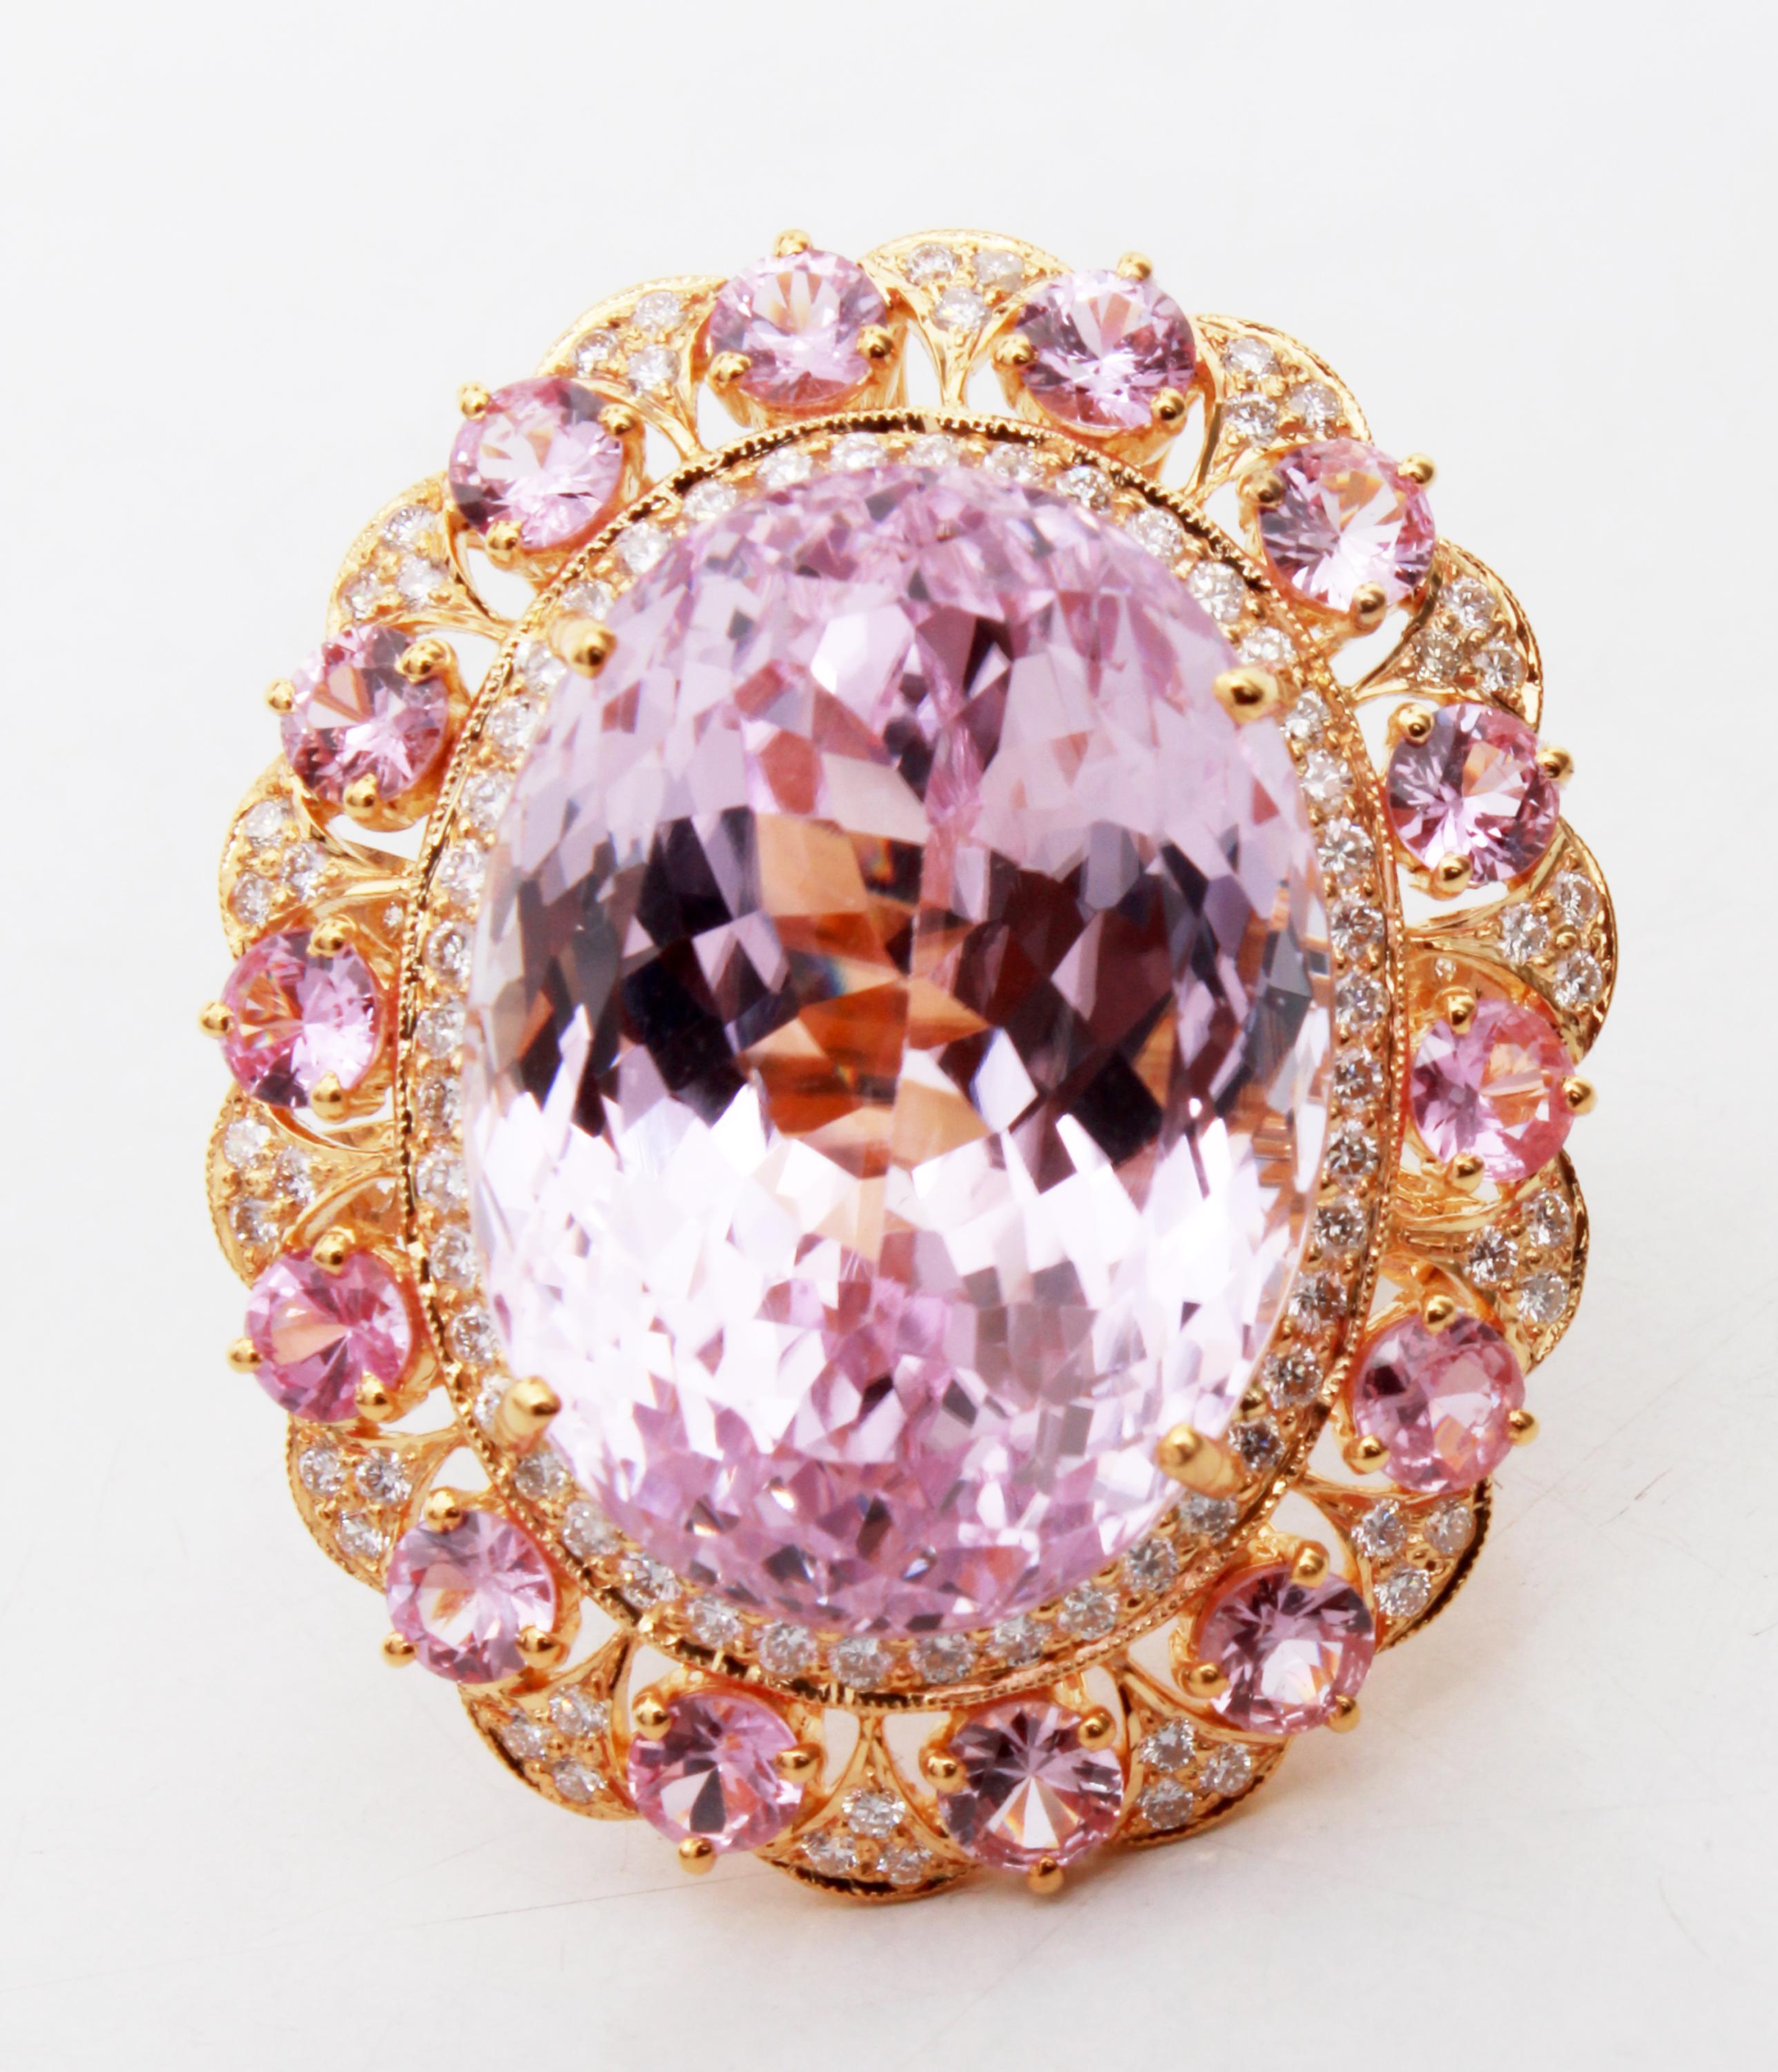 This beautiful ring has a huge 42.27 carat Kunzite that is set in the center of the ring and has 14 Round Pink Sapphires that weigh 3.04 carats. This ring also has 110 Round Cut Diamonds that weigh 1.32 carats and are set along the shank of the